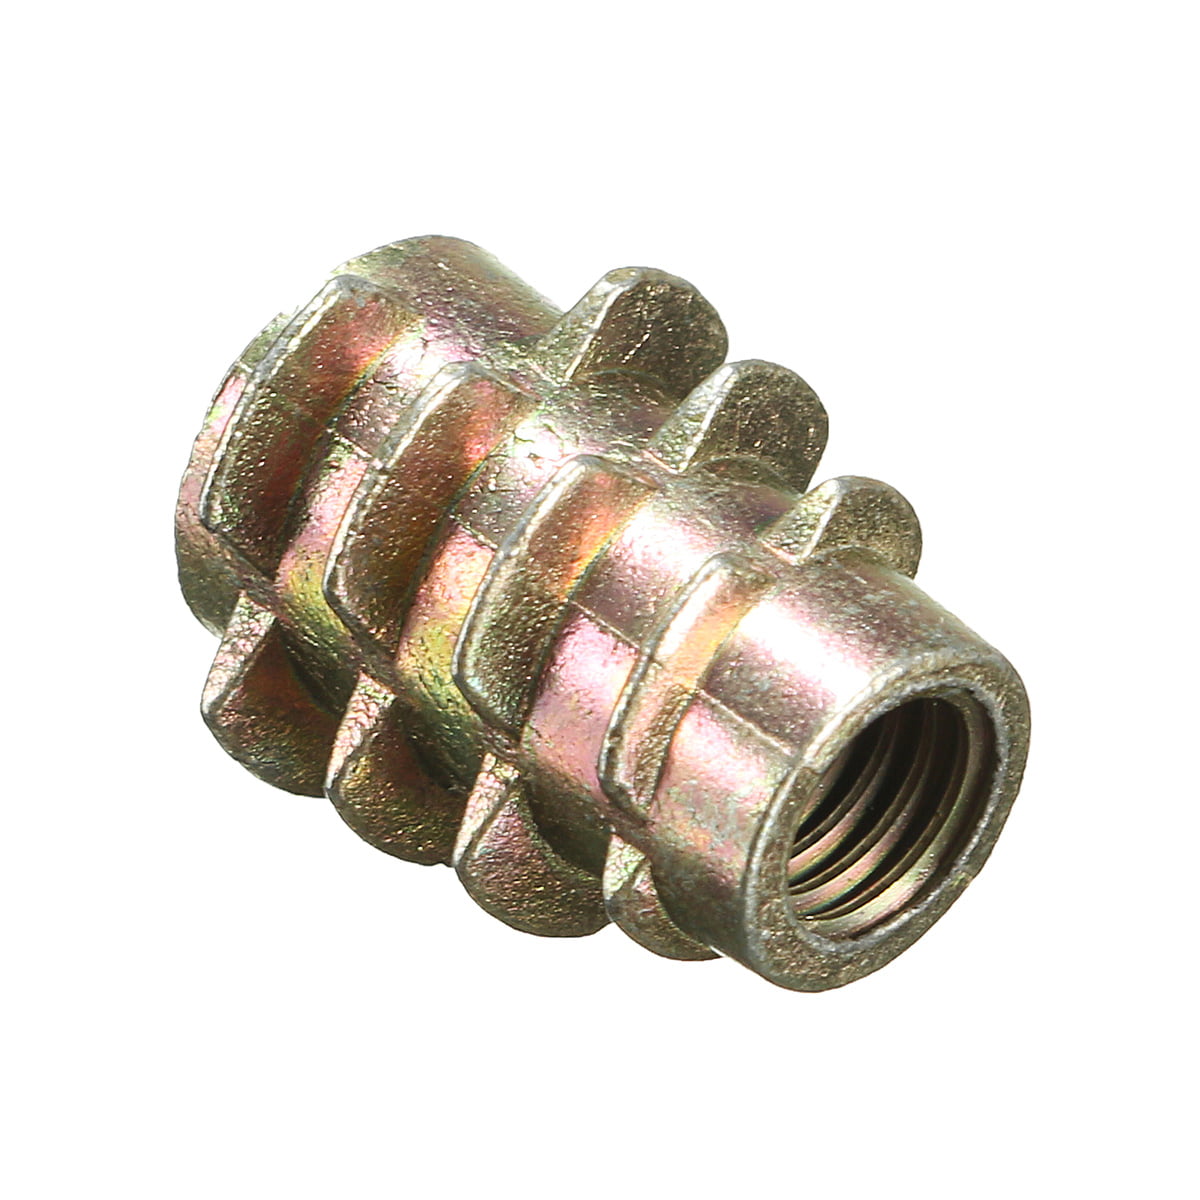 Type: Bronze NUTW-33779 M4x10mm Thread Interface Screw Insert Nuts 60 Pcs for Wooden Furniture 